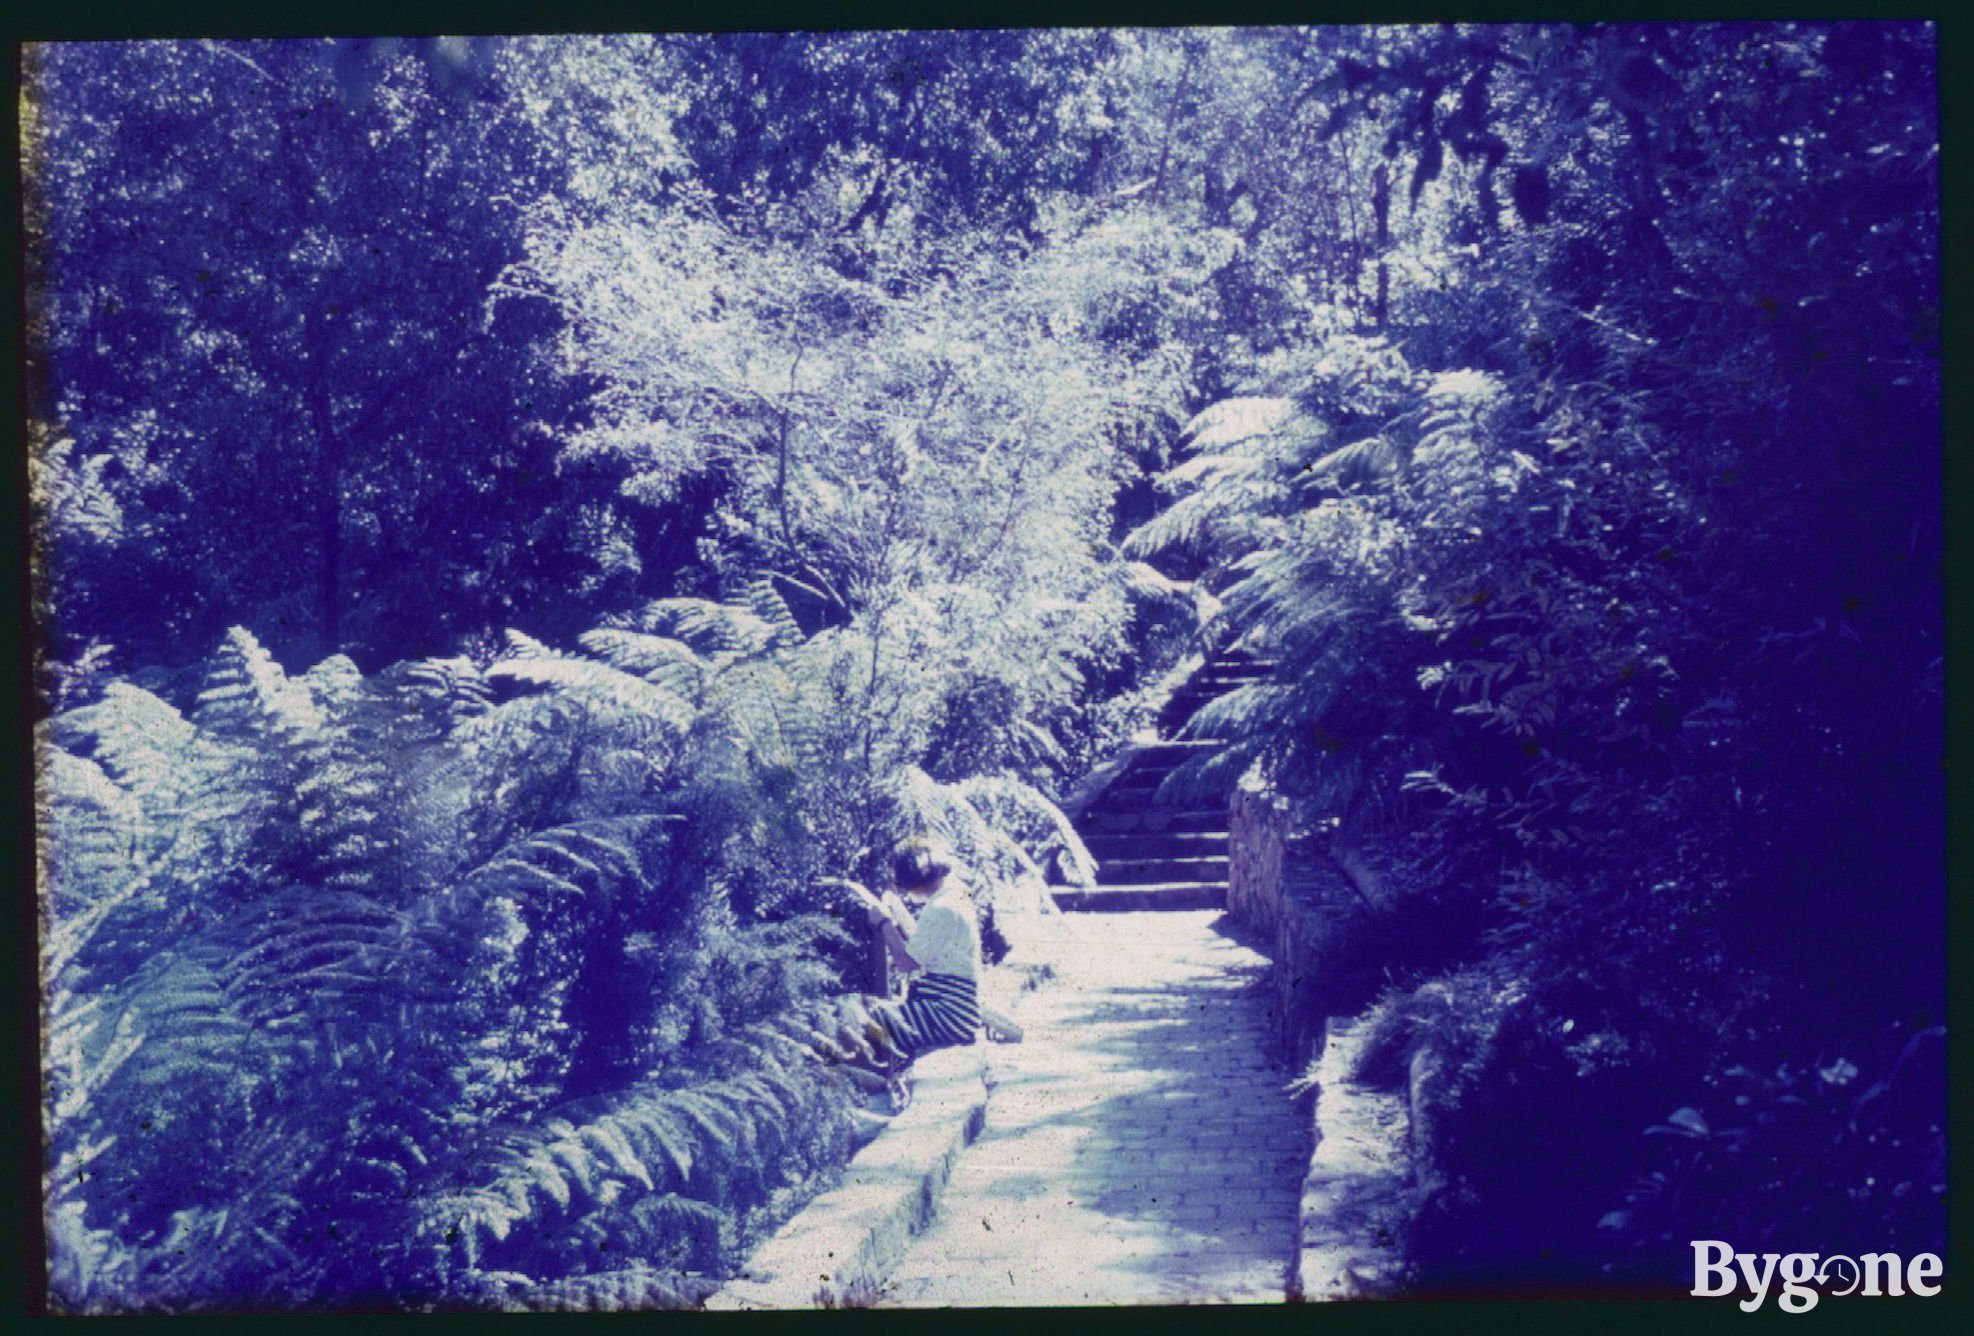 There is a stone pathway with an abundance of ferns growing on either side. To the left of the frame, a lady with short brown hair, wearing a white shirt and black and white striped skirt is sitting on a raised wall upon the path, looking at something she’s holding. The stone pathway turns into stone steps ascending deeper into the greenery. The slide has incurred some damage or possible light leak, filtering the whole image with a faint light blue.